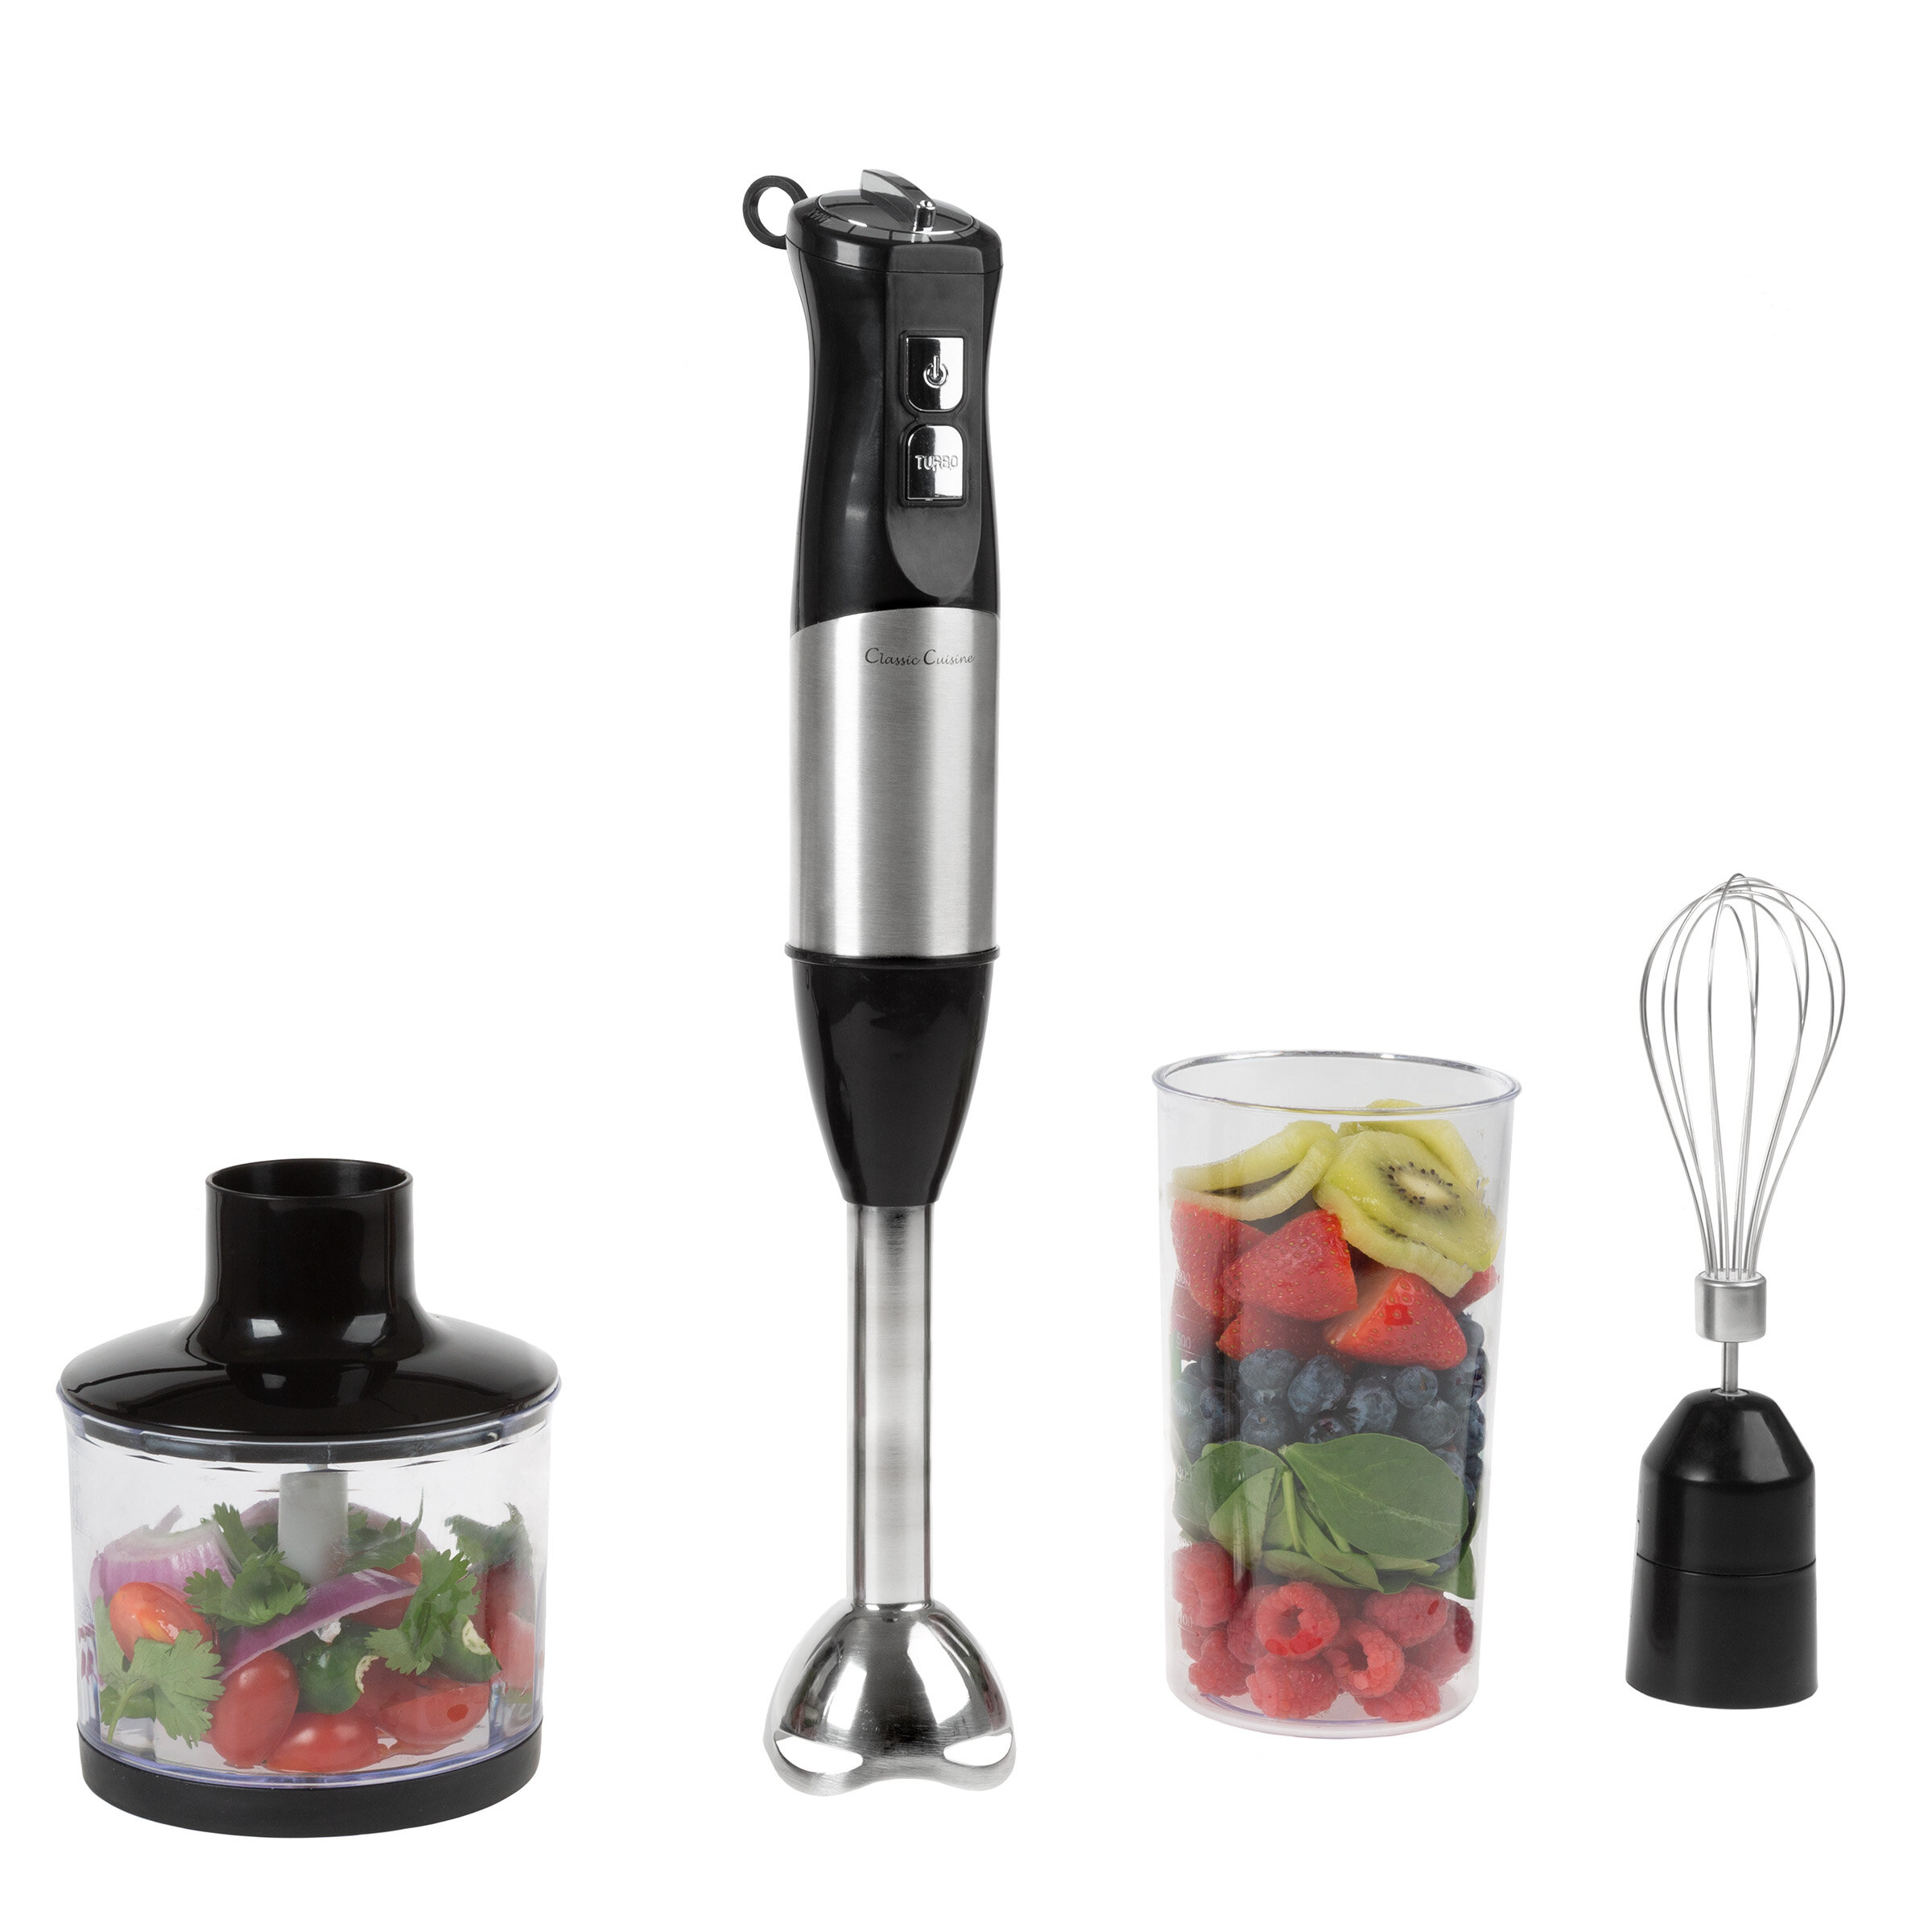 Ovente 6 Speed Countertop Blender with Travel Cup & Reviews